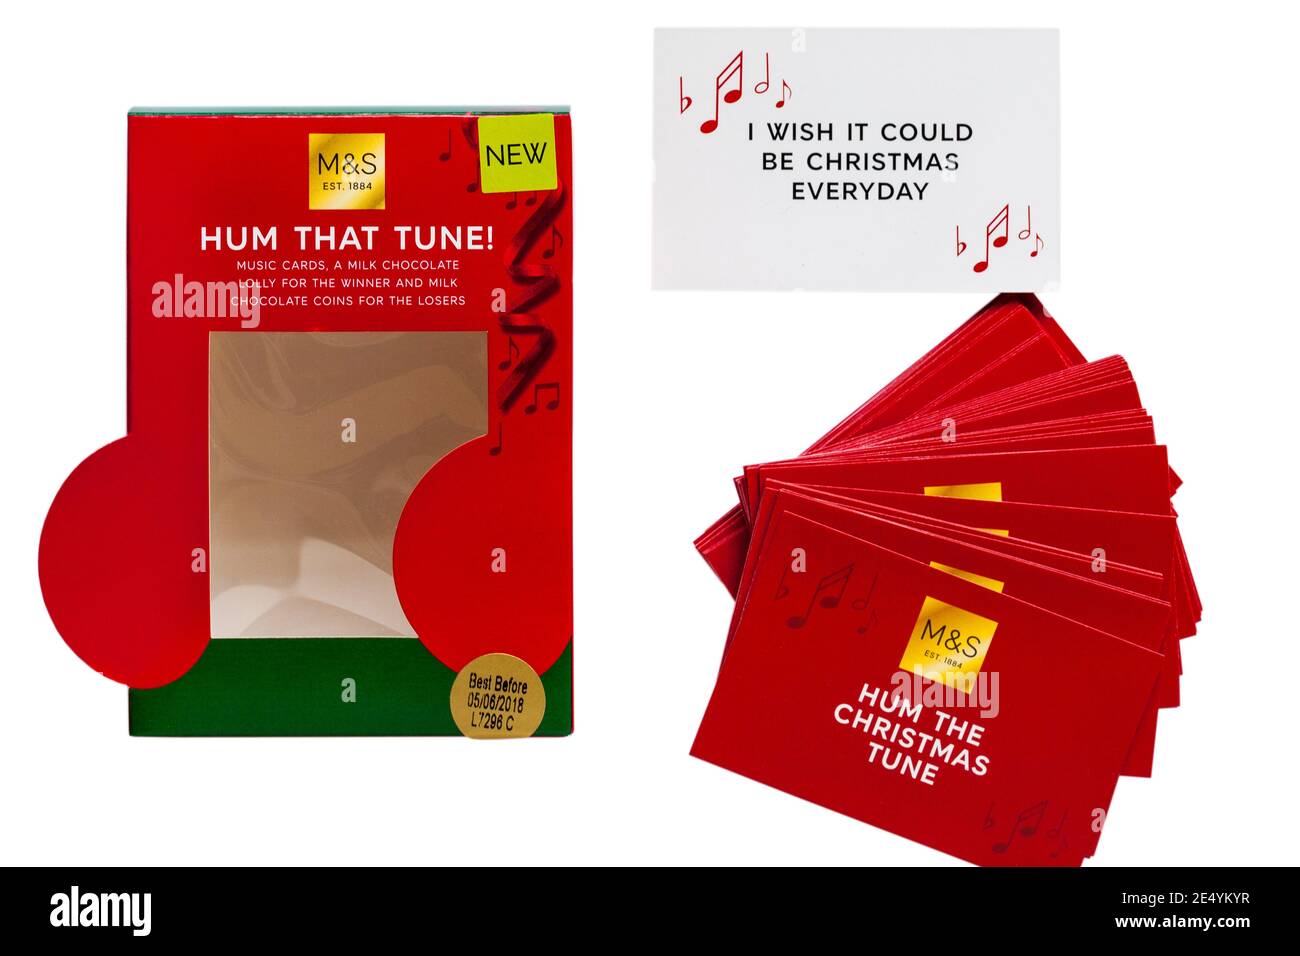 M&S Hum that Tune game with Hum the Christmas Tune cards removed from box set on white background - I wish it could be Christmas every day Stock Photo